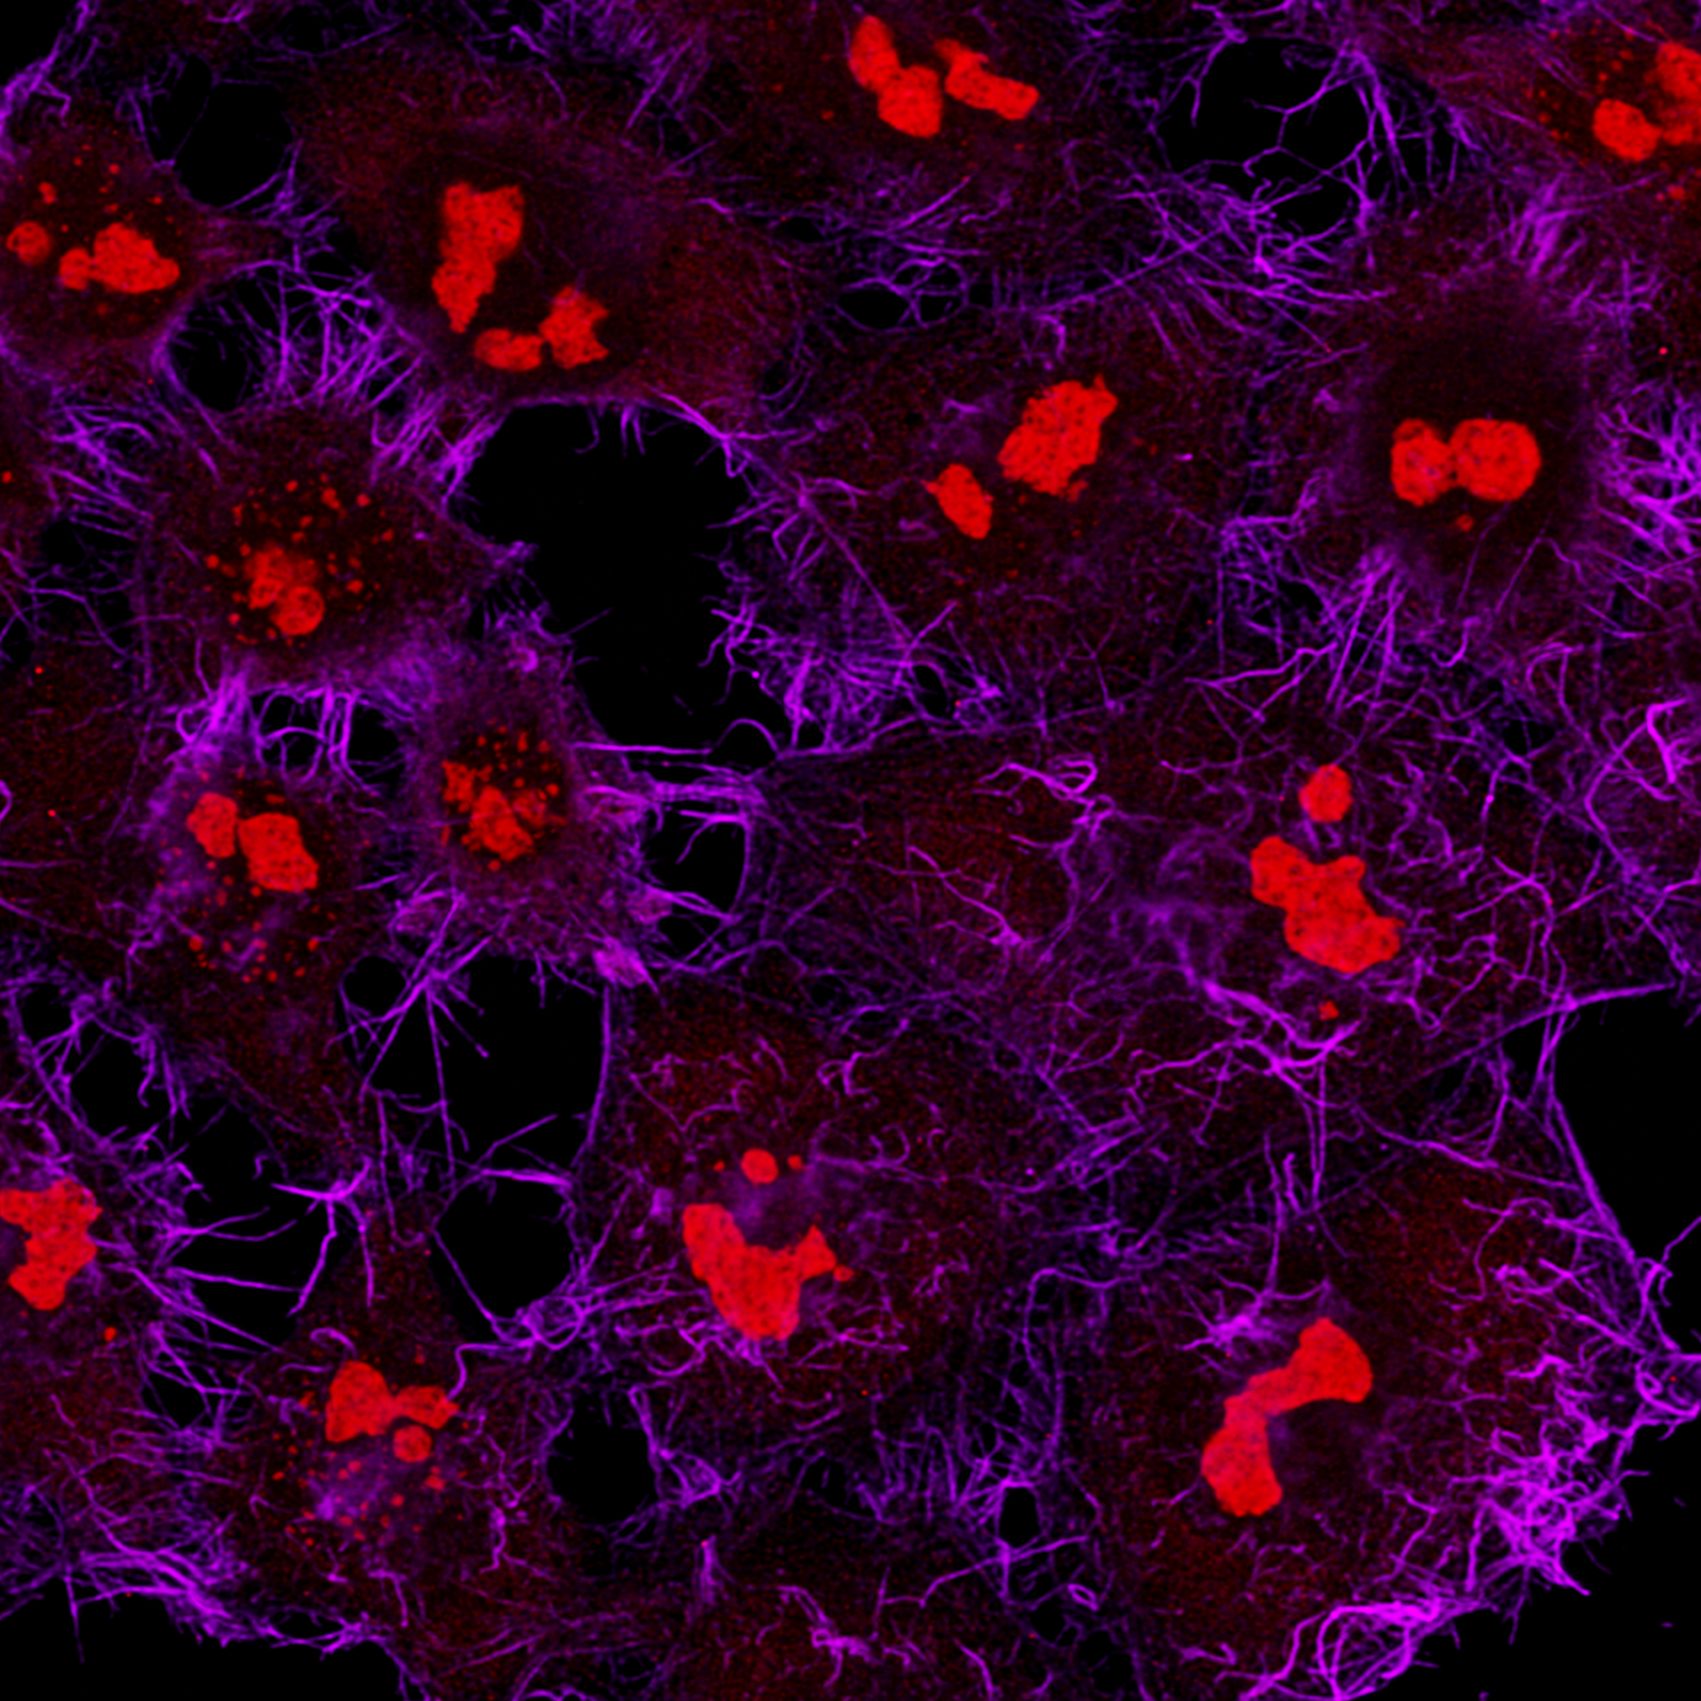 Immunofluorescence of HeLa: PFA-fixed HeLa cells were stained with anti-GNL3 (67169-1-lg) labeled with FlexAble CoraLite® Plus 555 Kit (KFA042, red) and anti-Actin labeled with FlexAble CoraLite® Plus 647 Kit (KFA043, magenta).
Confocal images were acquired with a 100x oil objective and post-processed. Images were recorded at the Core Facility Bioimaging at the Biomedical Center, LMU Munich.